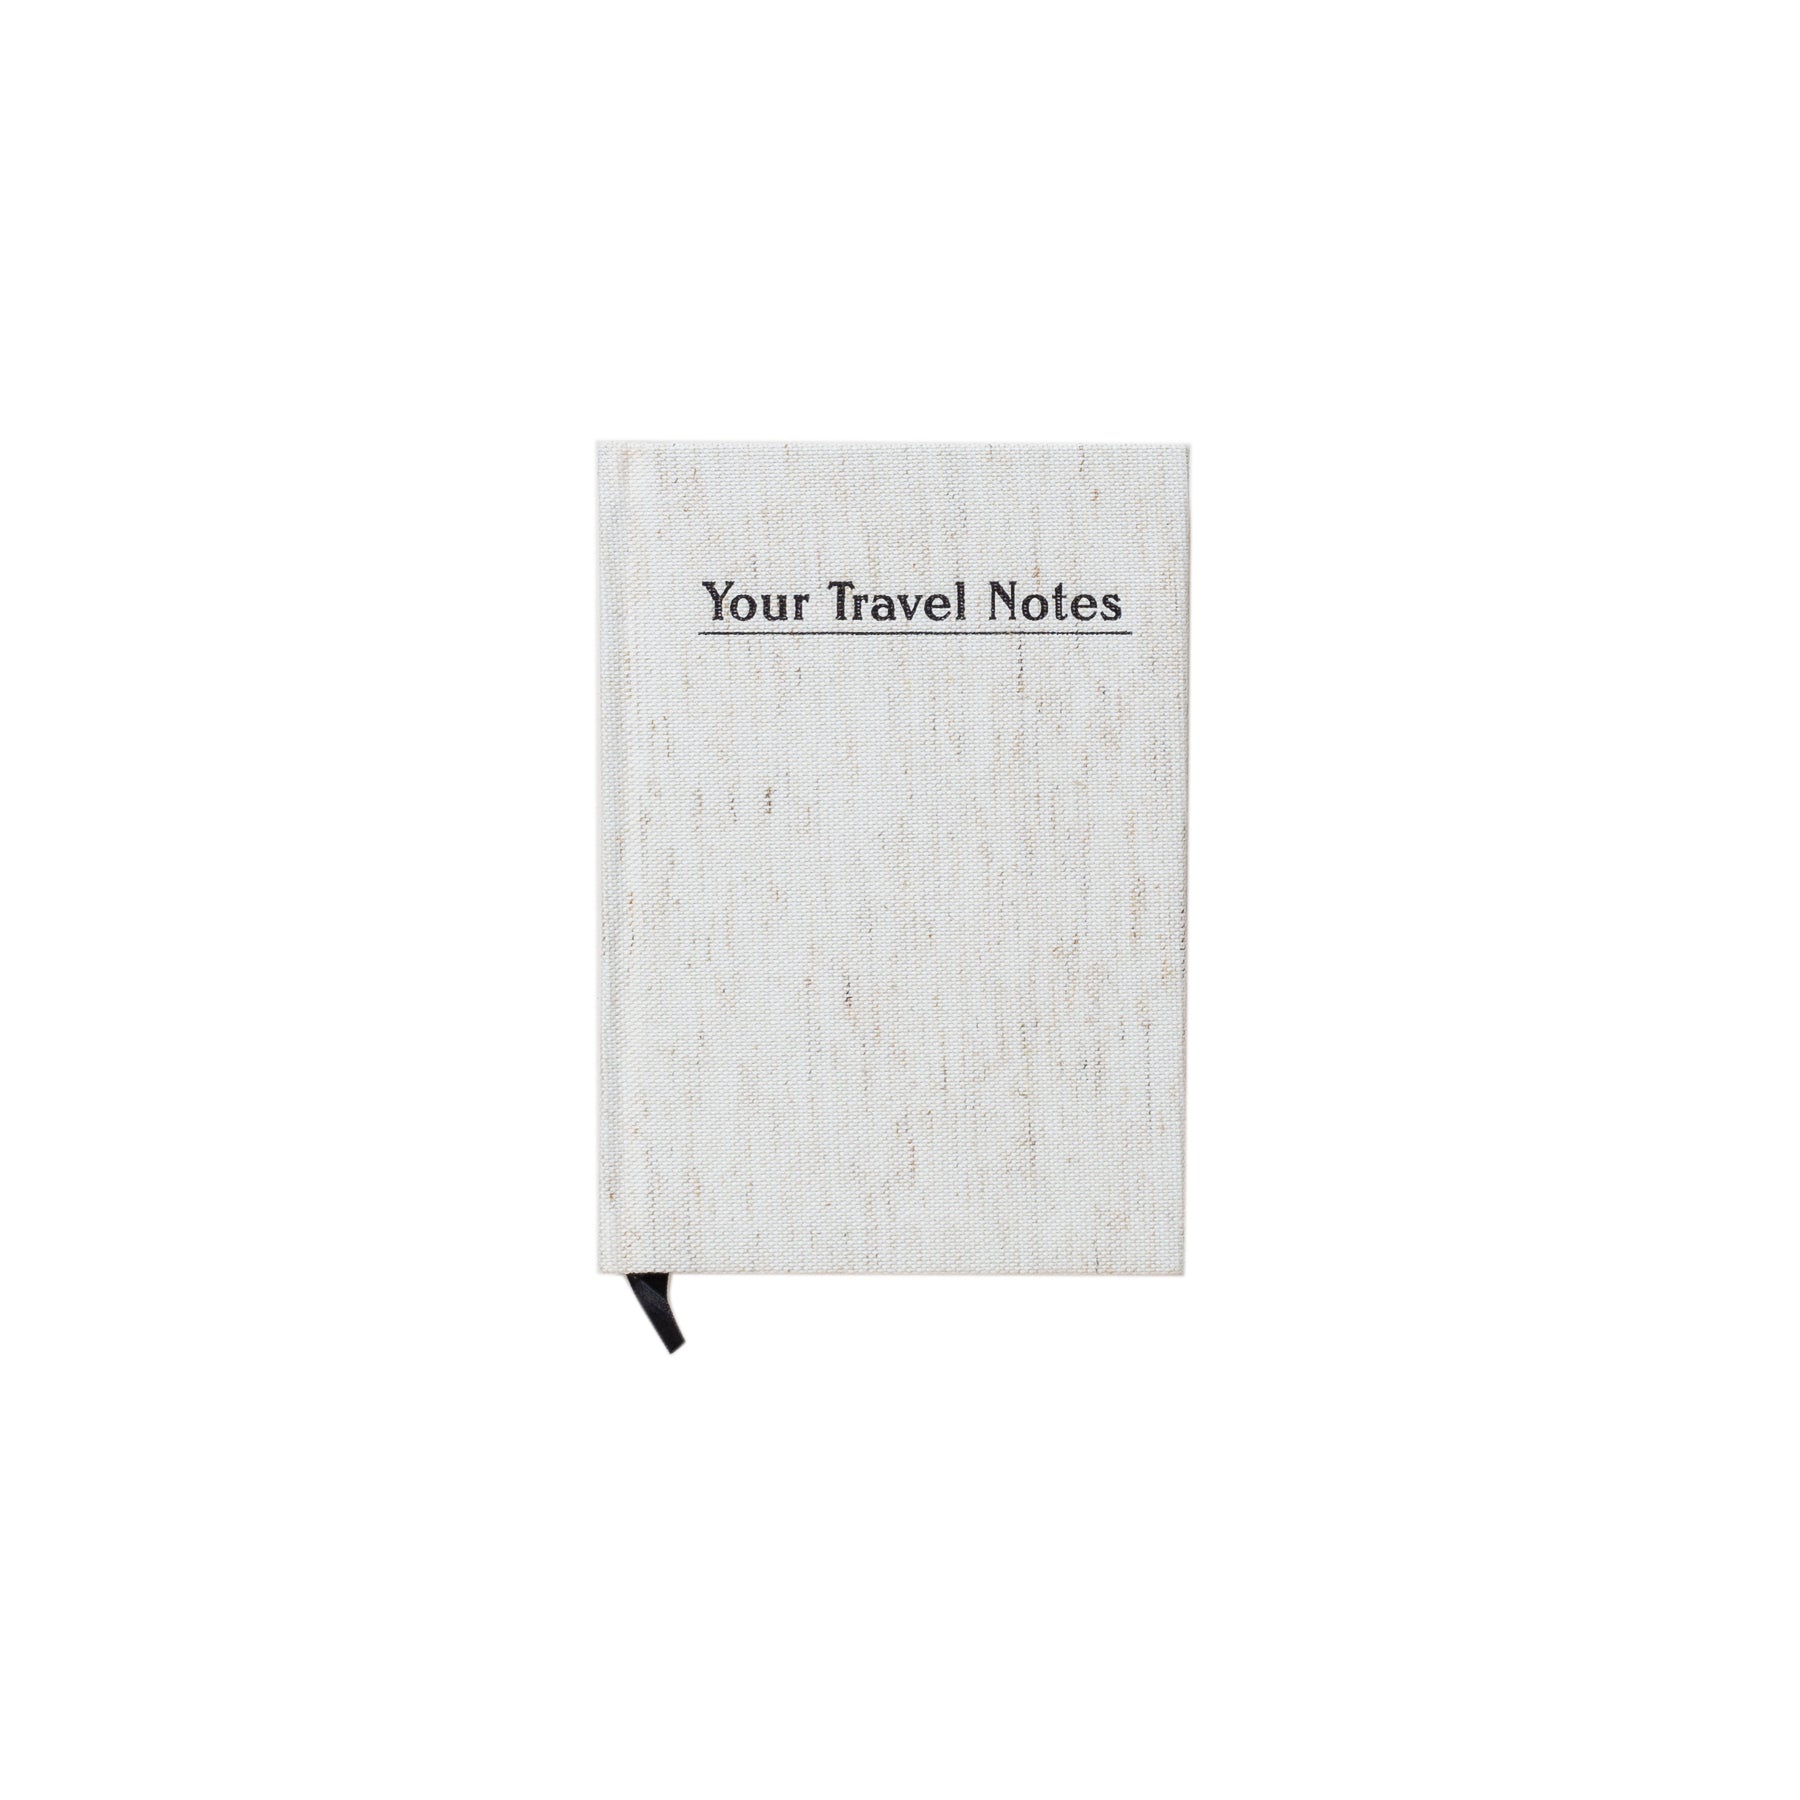 Your Travel Notes Journal